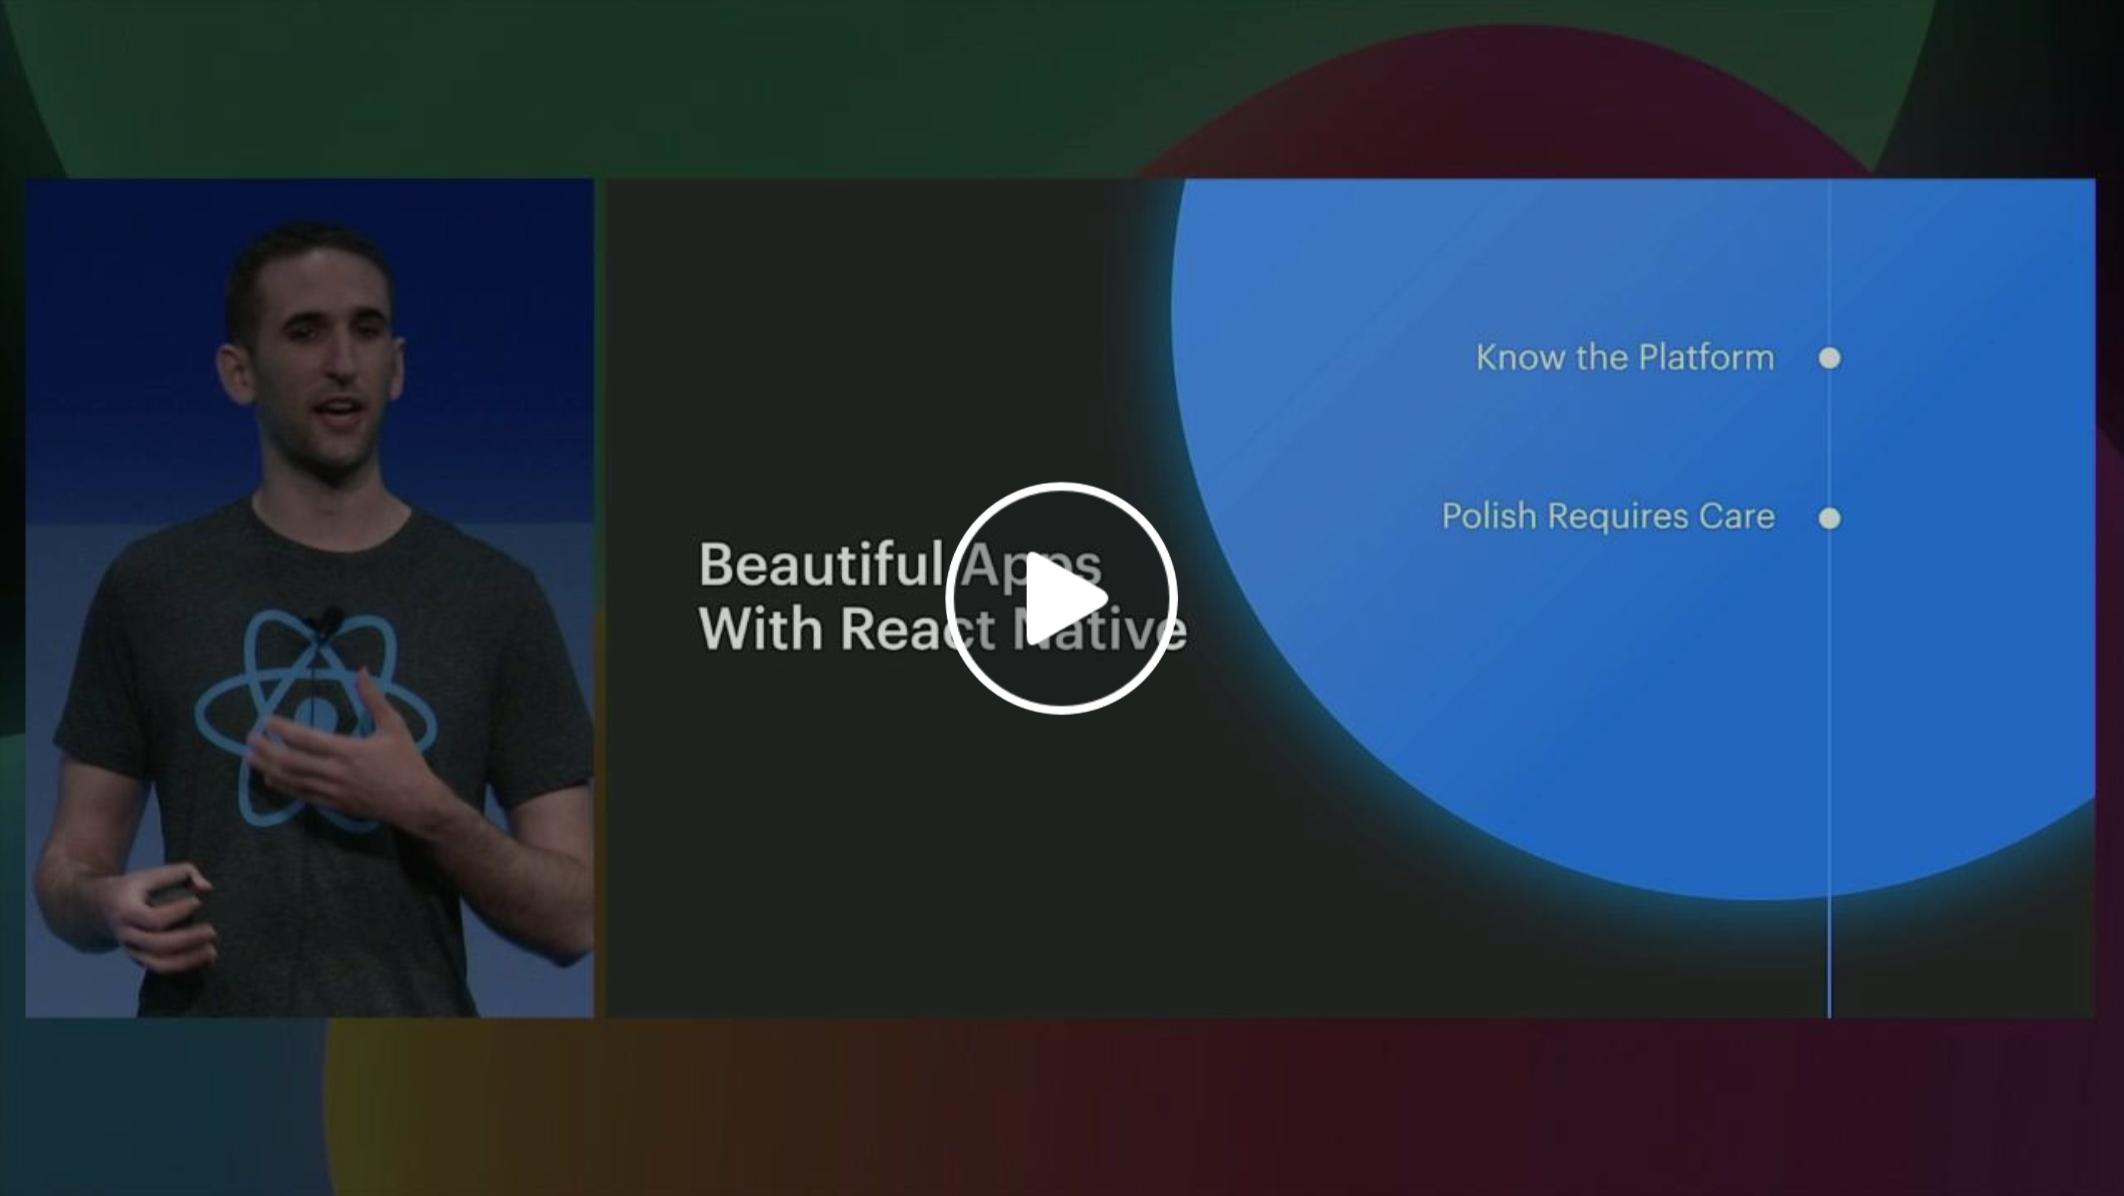 F8 Talk about React Native